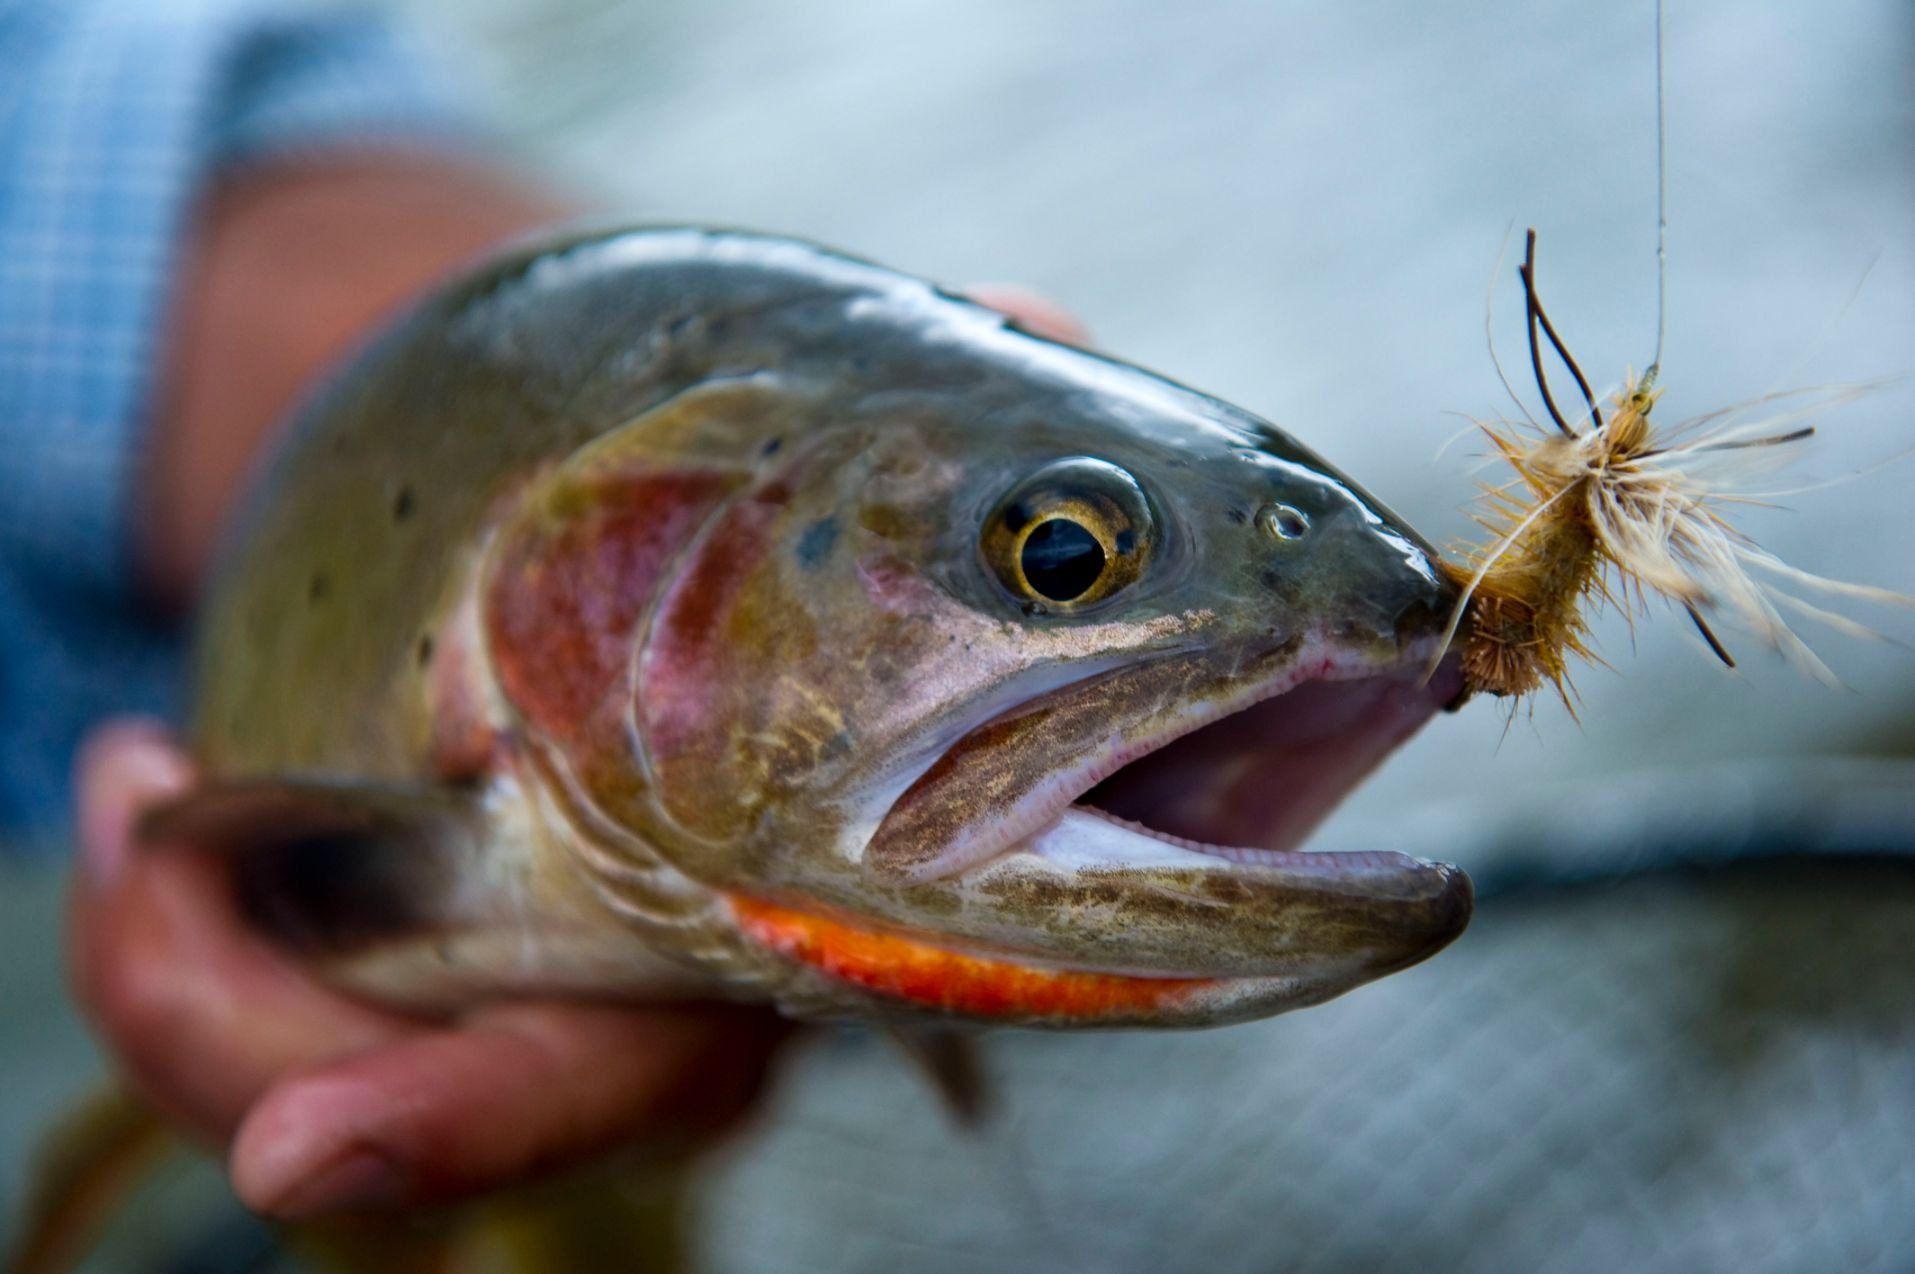 Montana Trout Wranglers - When is the best time to fish Montana?